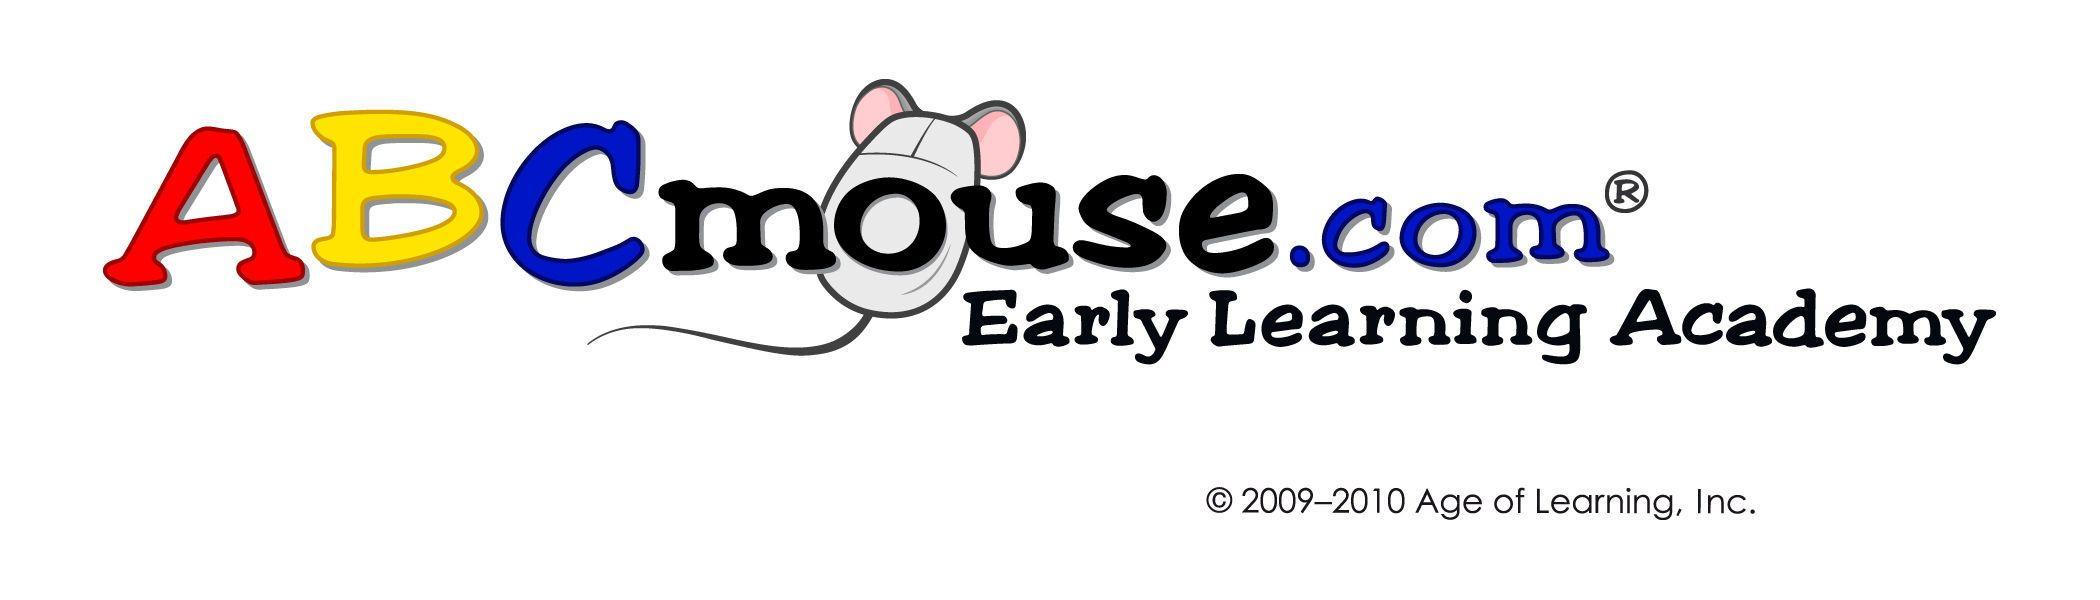 Abcmouse.com Logo - ABCmouse Assets: Kids Learning, Phonics, Educational Games ...